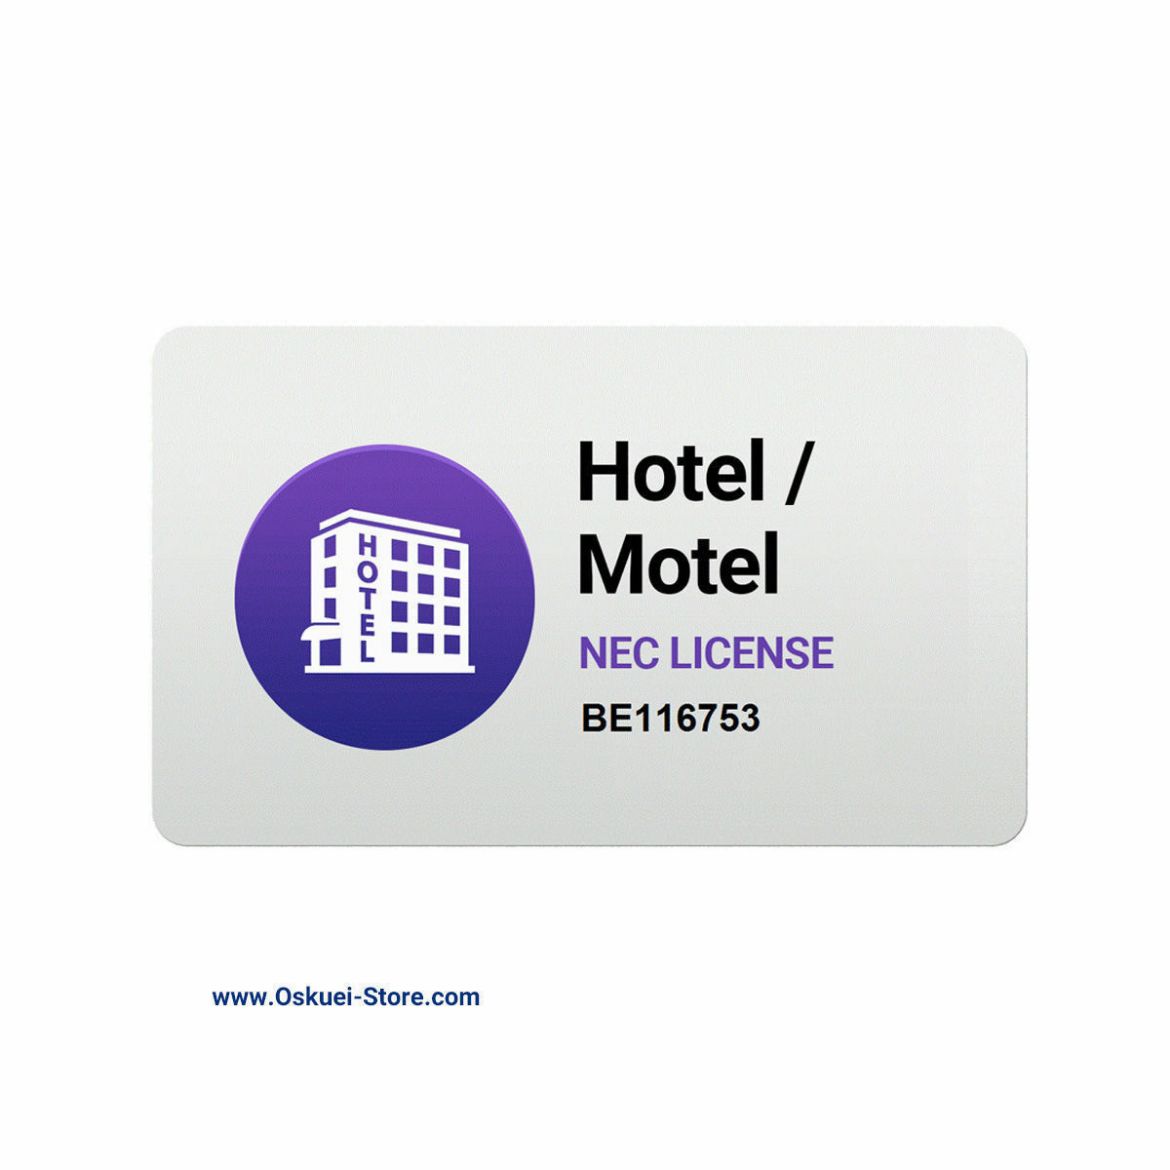 SL2100 Hotel and Motel Features NEC License